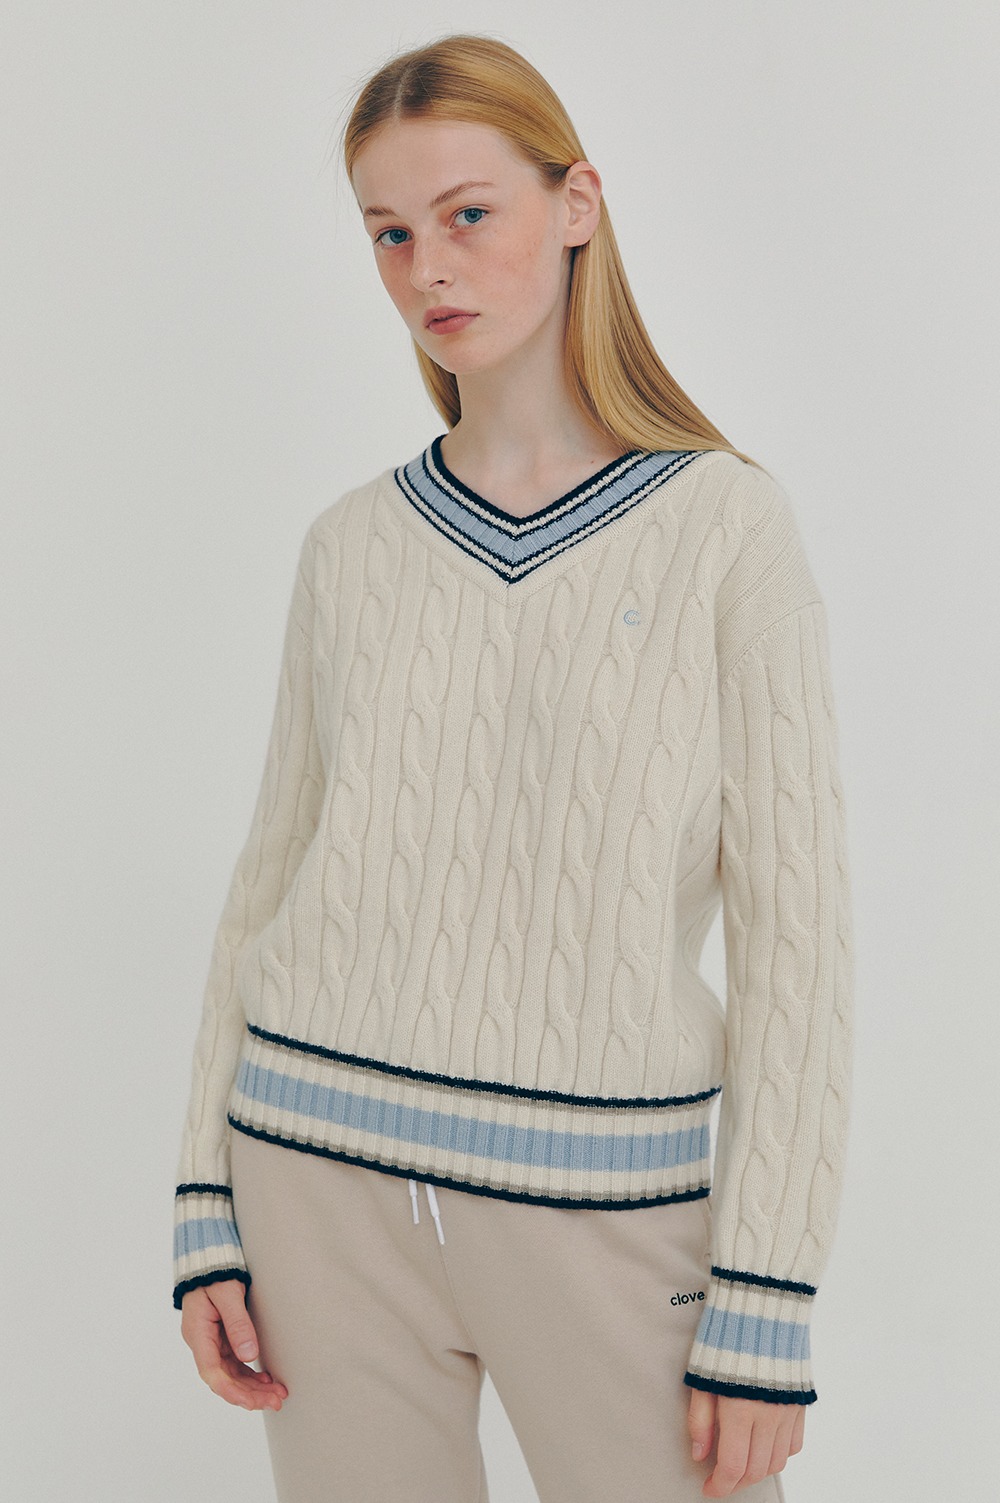 clove - [FW21 clove] Wool V-neck Knit Pullover (Ivory)